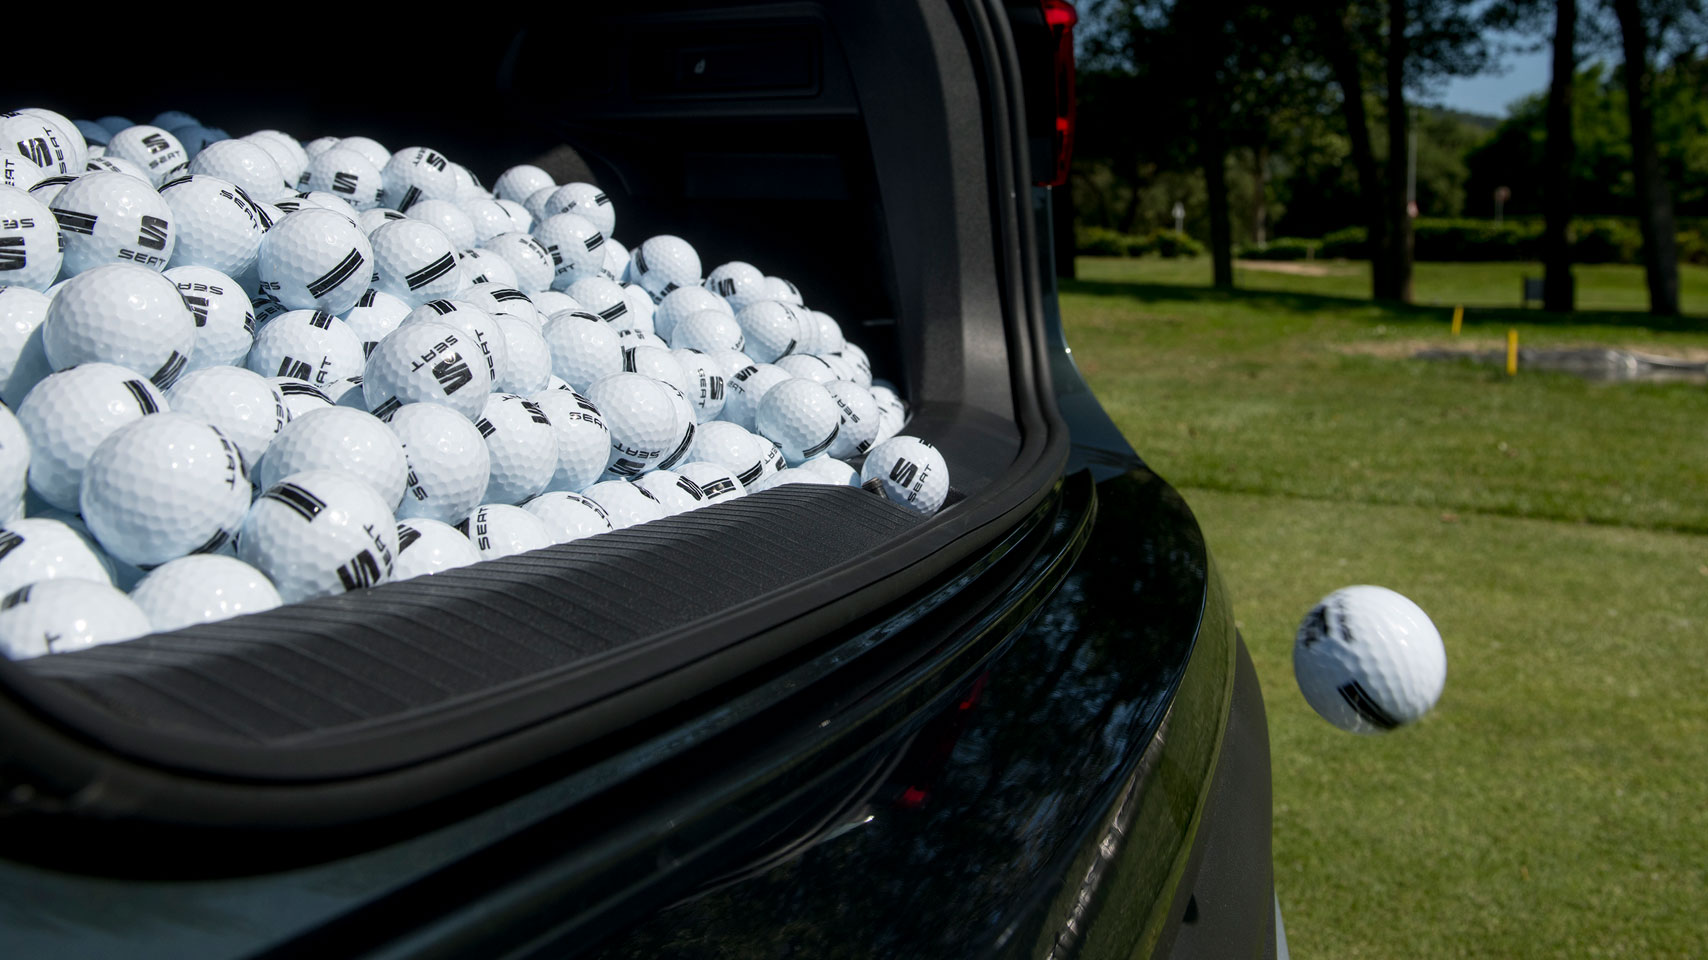 How many golf balls fit in the boot of a Tarraco